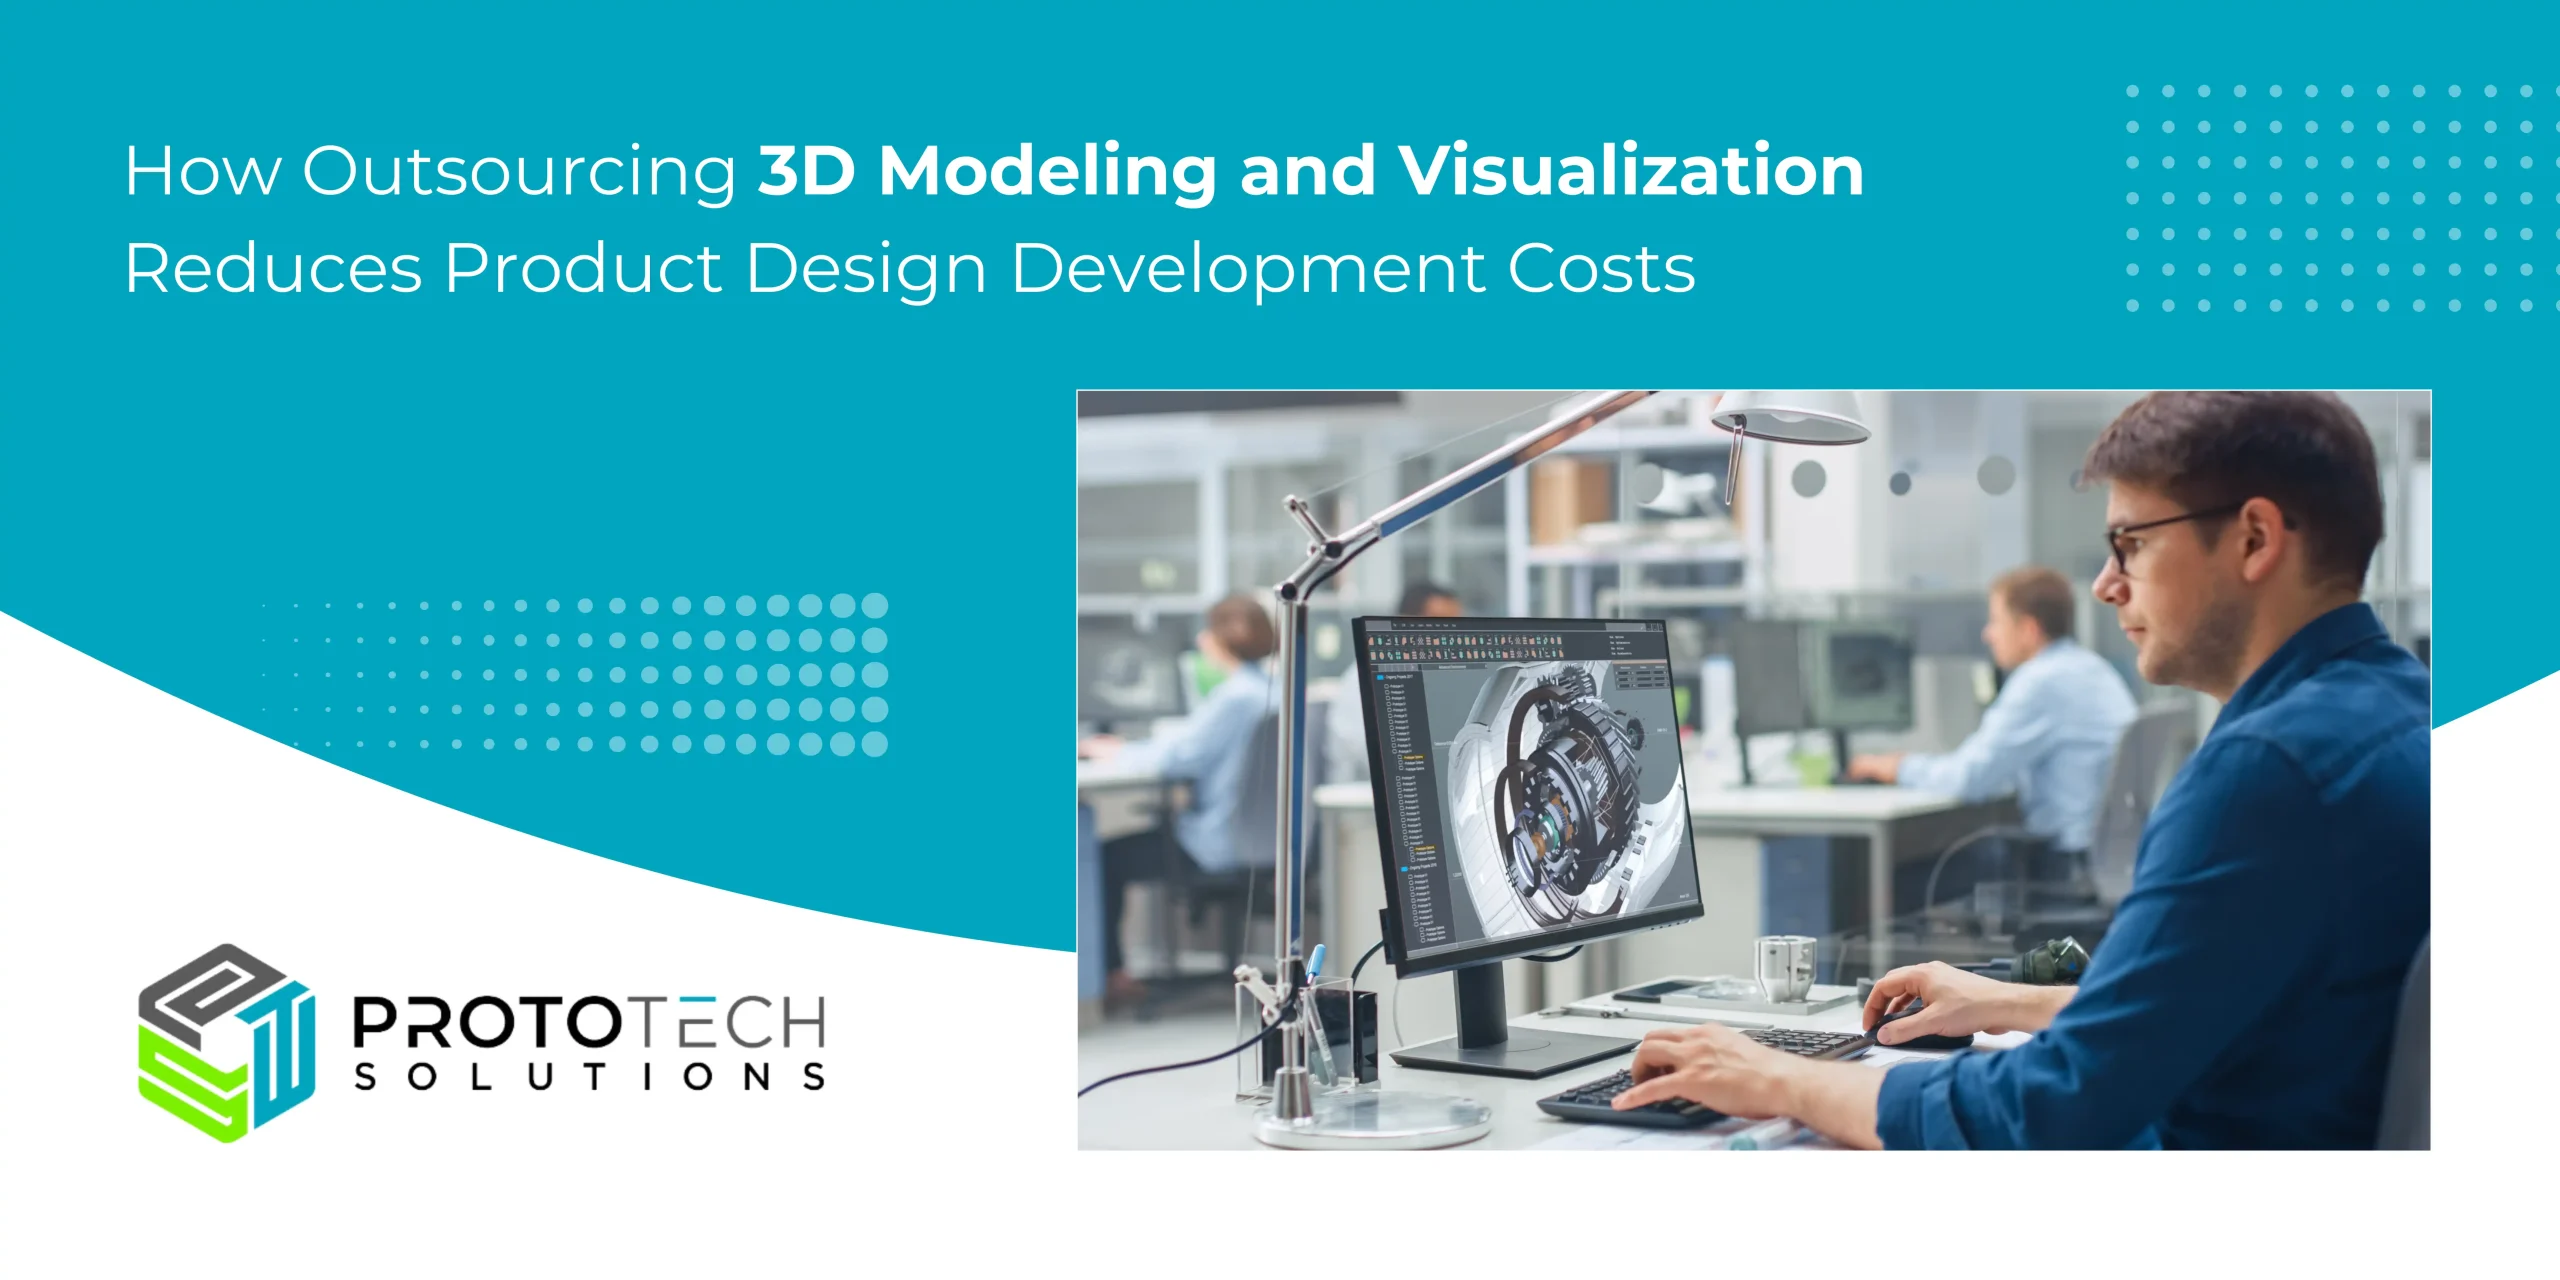 How Outsourcing 3D Modeling and Visualization Reduces Product Design Development Costs